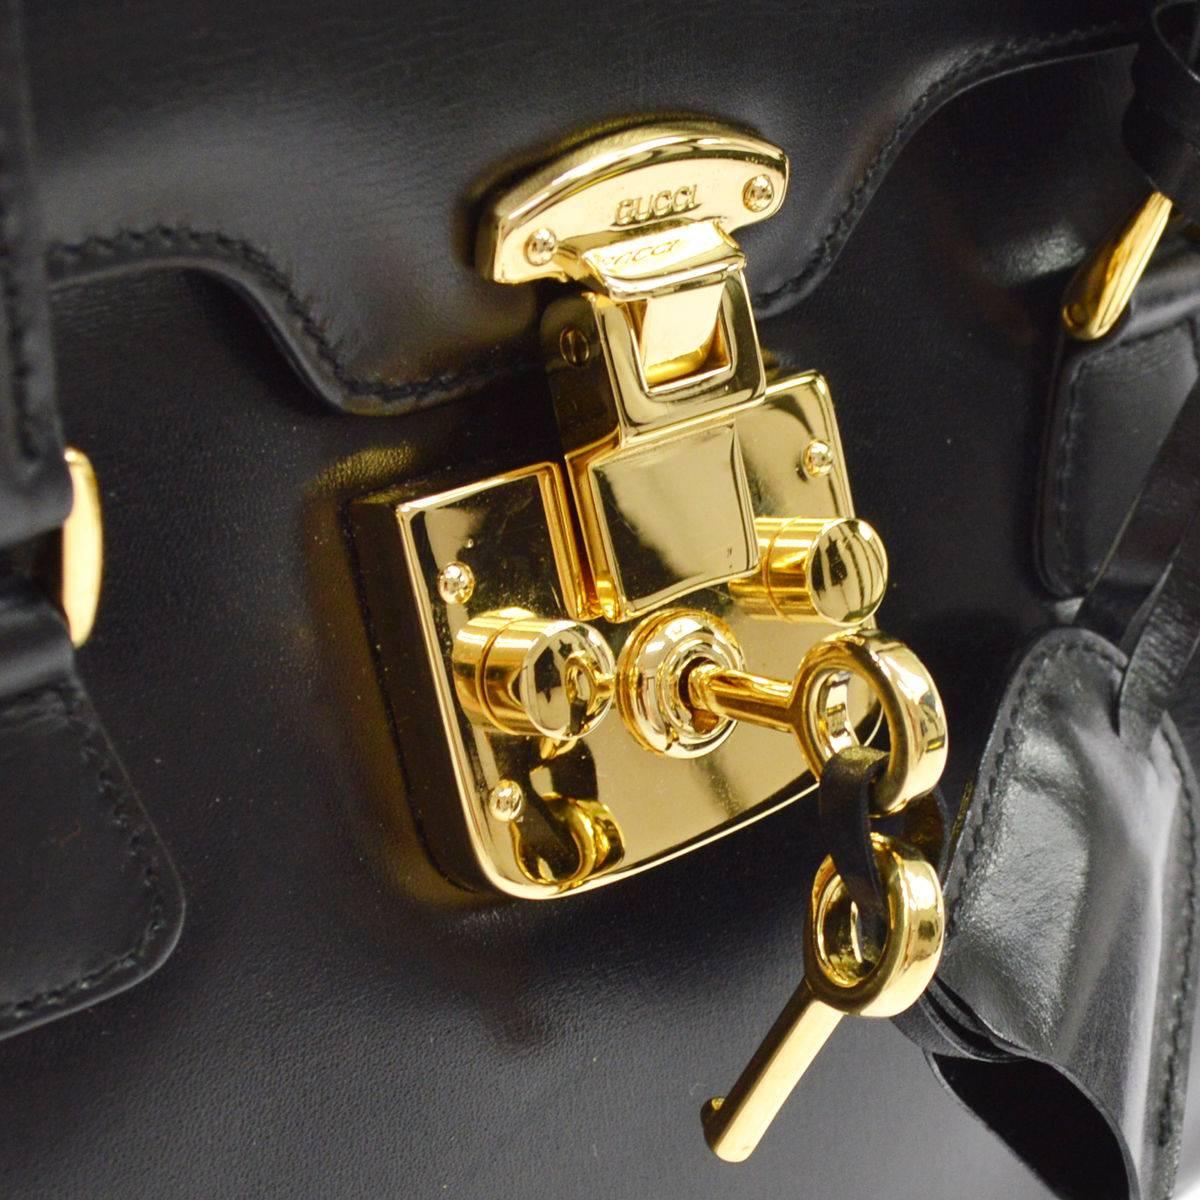 Women's Gucci Black Leather Gold Kelly Style Top Handle Satchel Flap Bag W/ Accessories